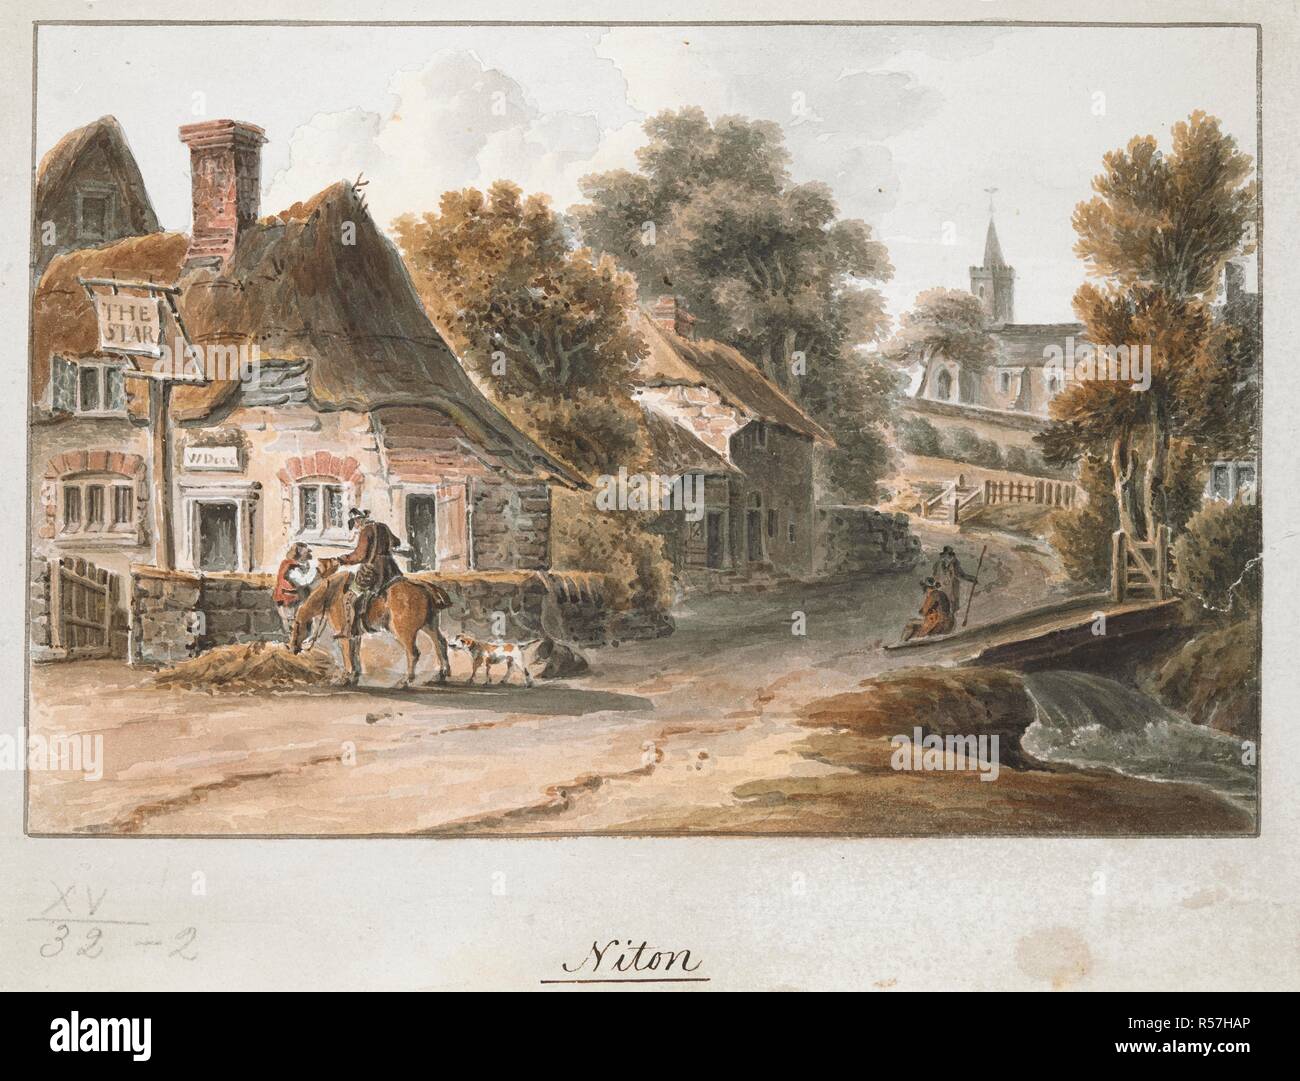 Figures, a horse and a dog in front of an inn called 'The Star'; a bridge and a small waterfall to the right; a dirt road leading to a church in the distance. Niton. c. 1790. Pen and black ink with watercolour. Source: Maps K.Top.15.32.2. Language: English. Author: Hassell, John. Stock Photo